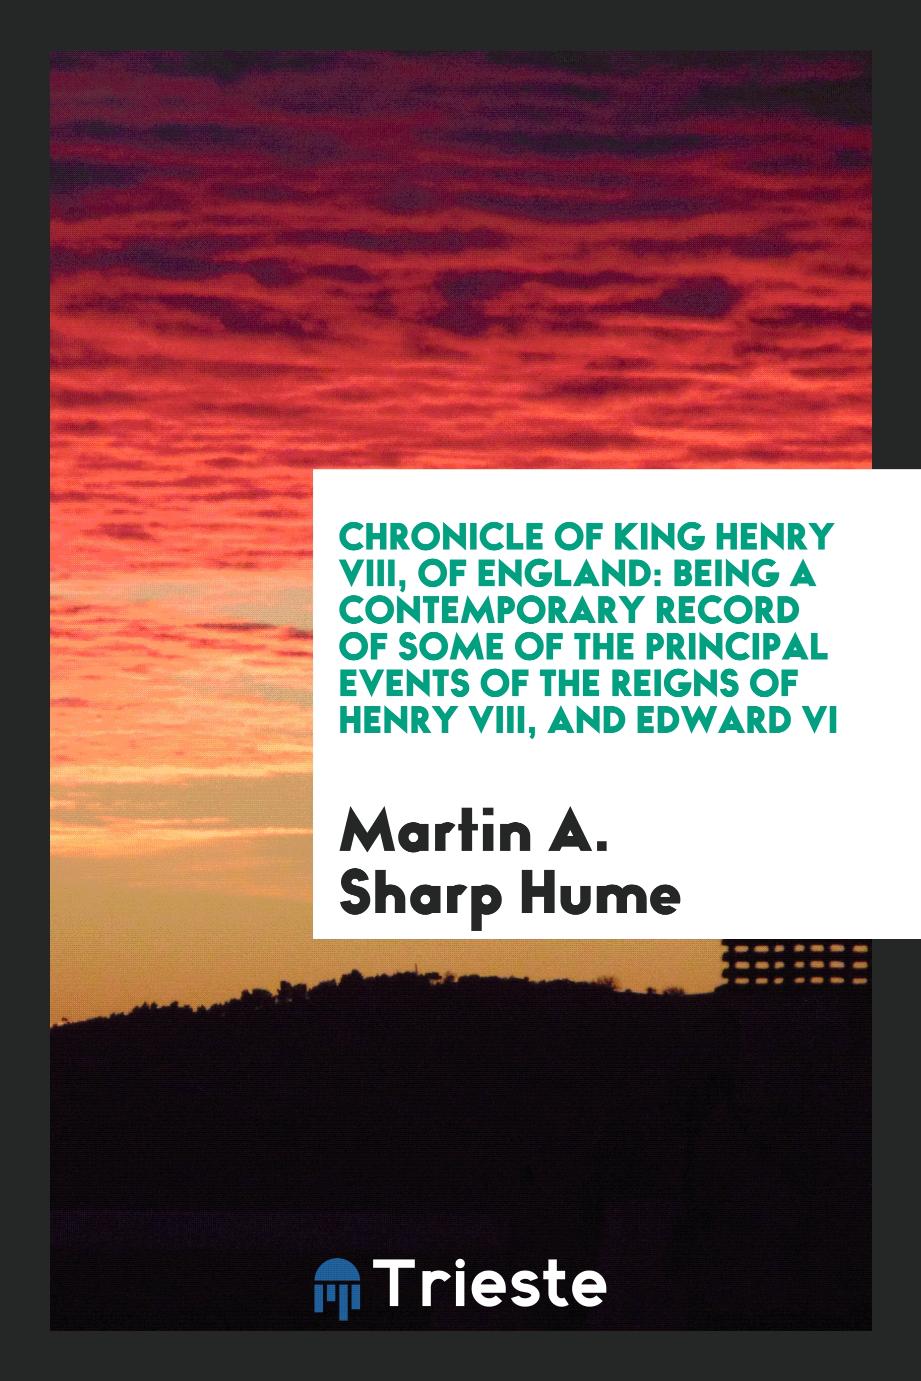 Martin A. Sharp Hume - Chronicle of King Henry VIII, of England: Being a Contemporary Record of Some of the Principal Events of the Reigns of Henry VIII, and Edward VI